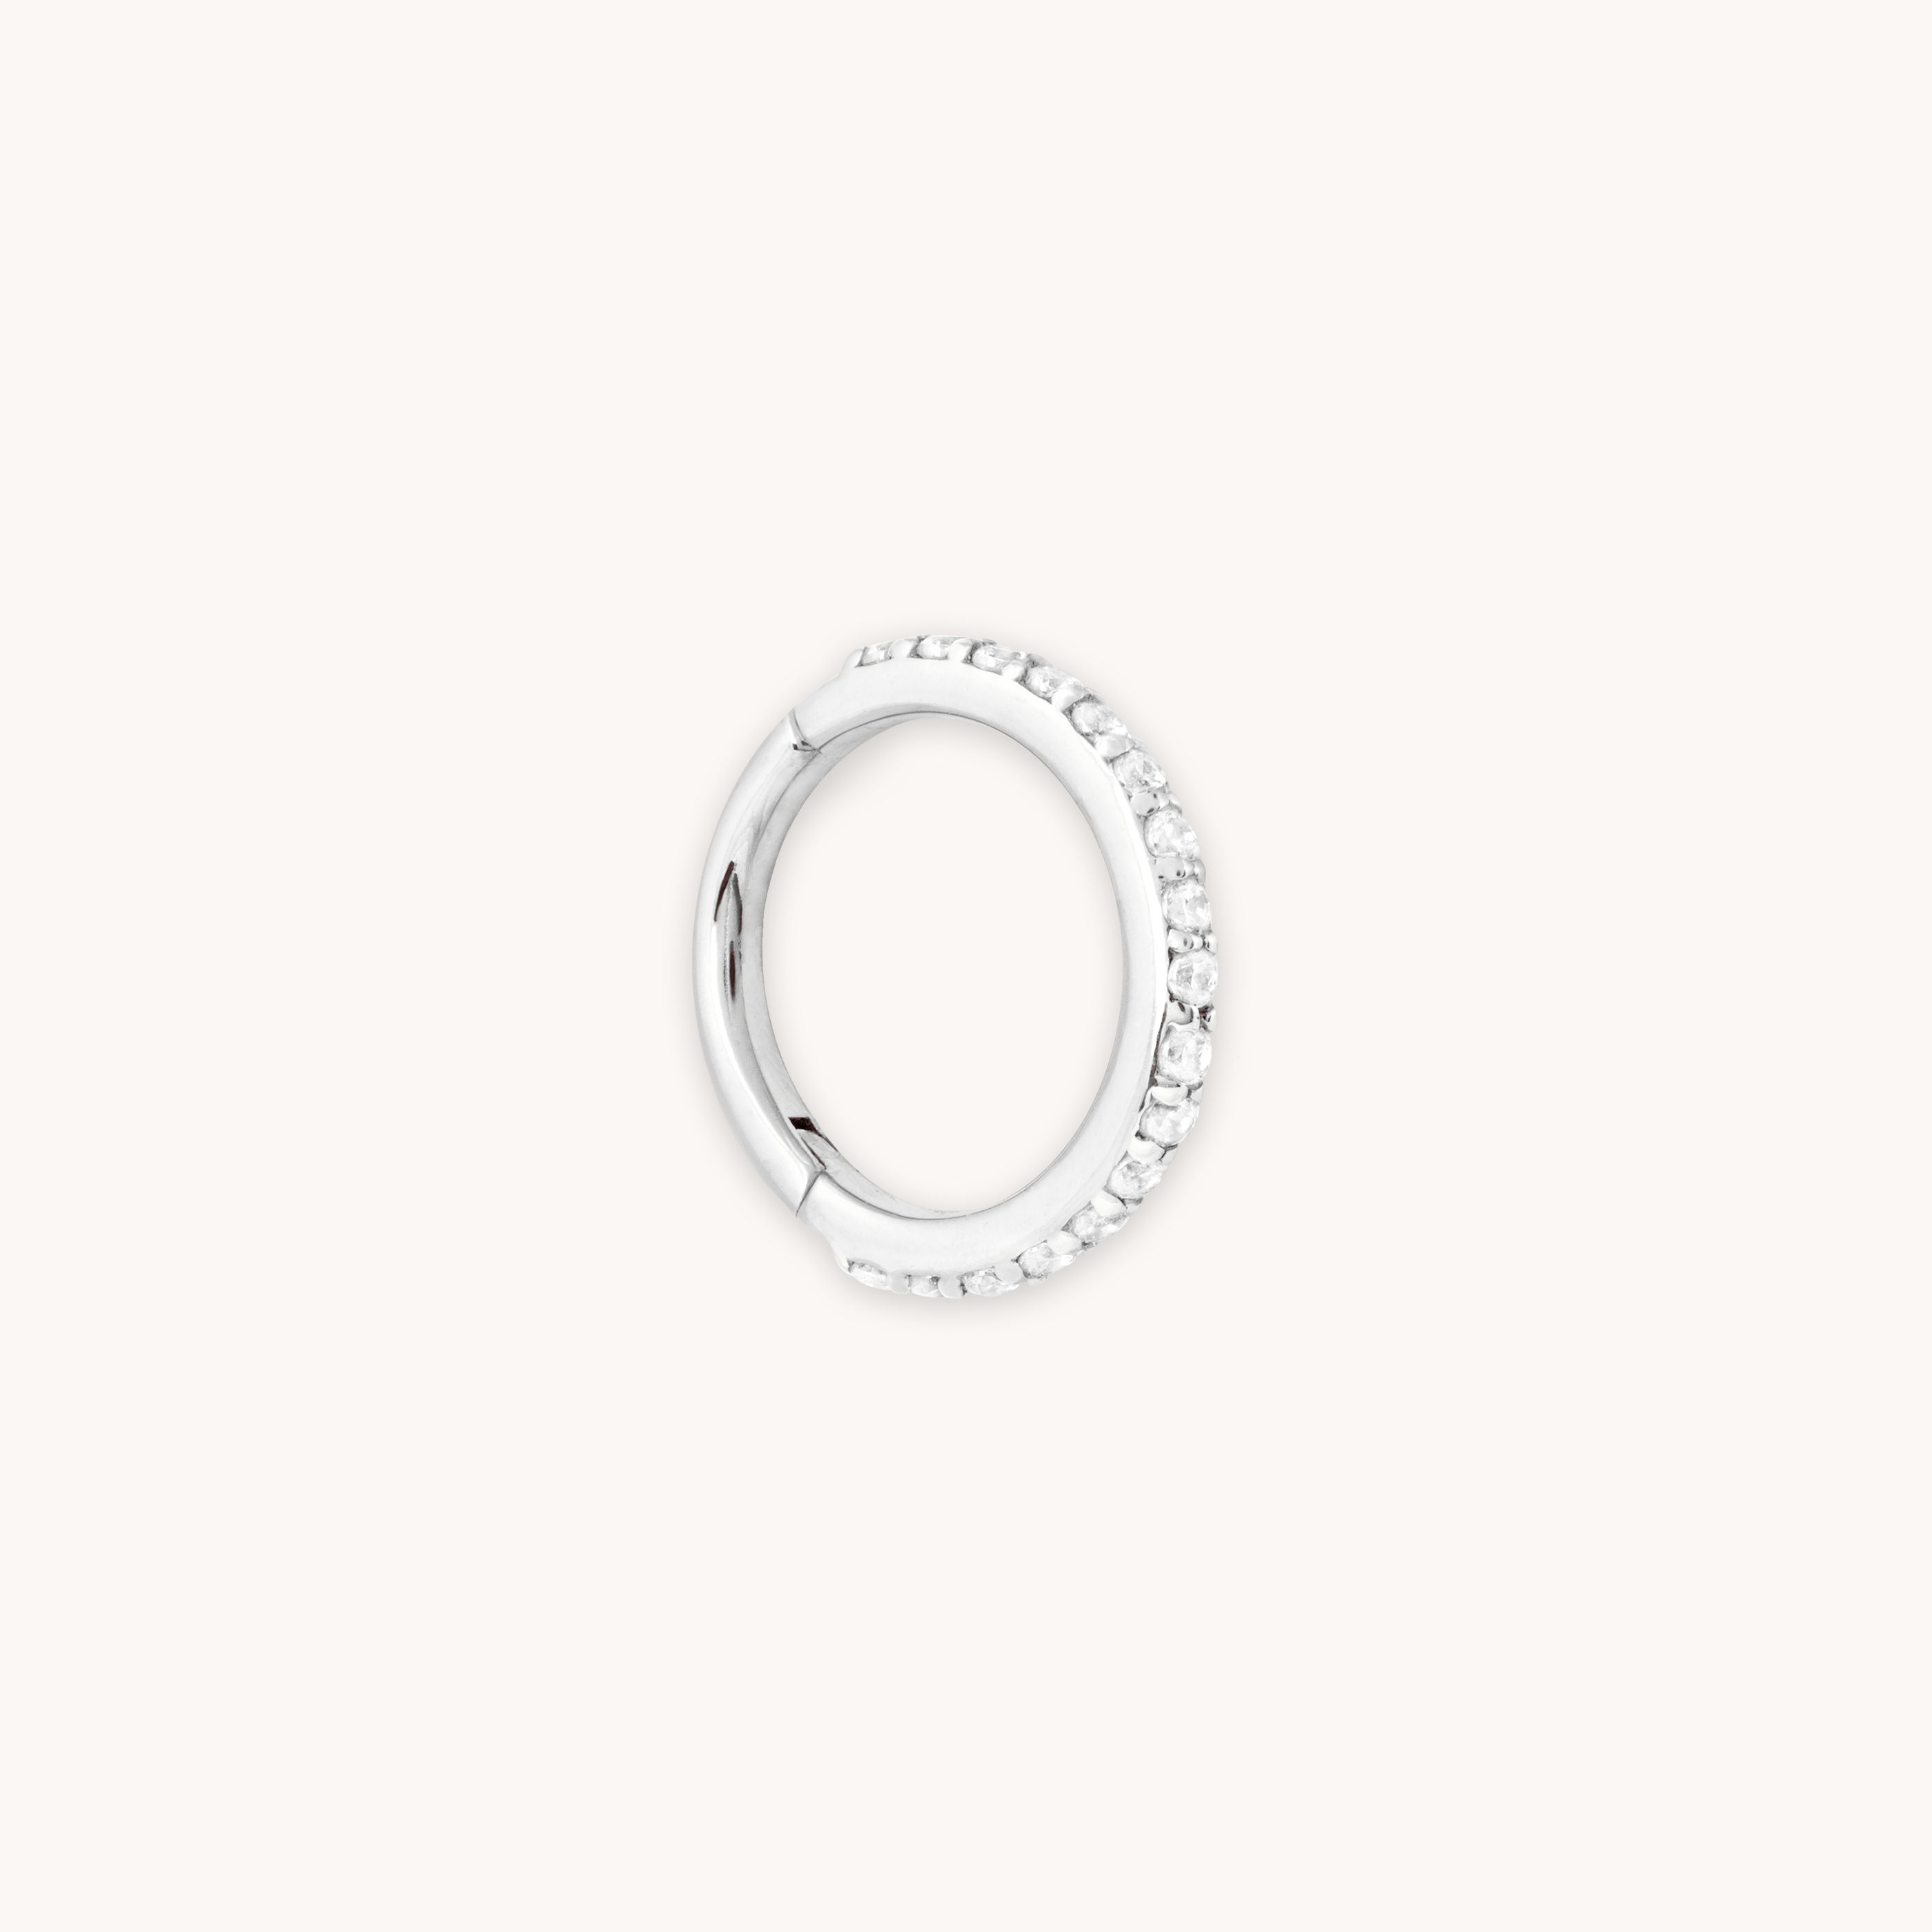 SOLID WHITE GOLD CRYSTAL PIERCING HOOP CUT OUT